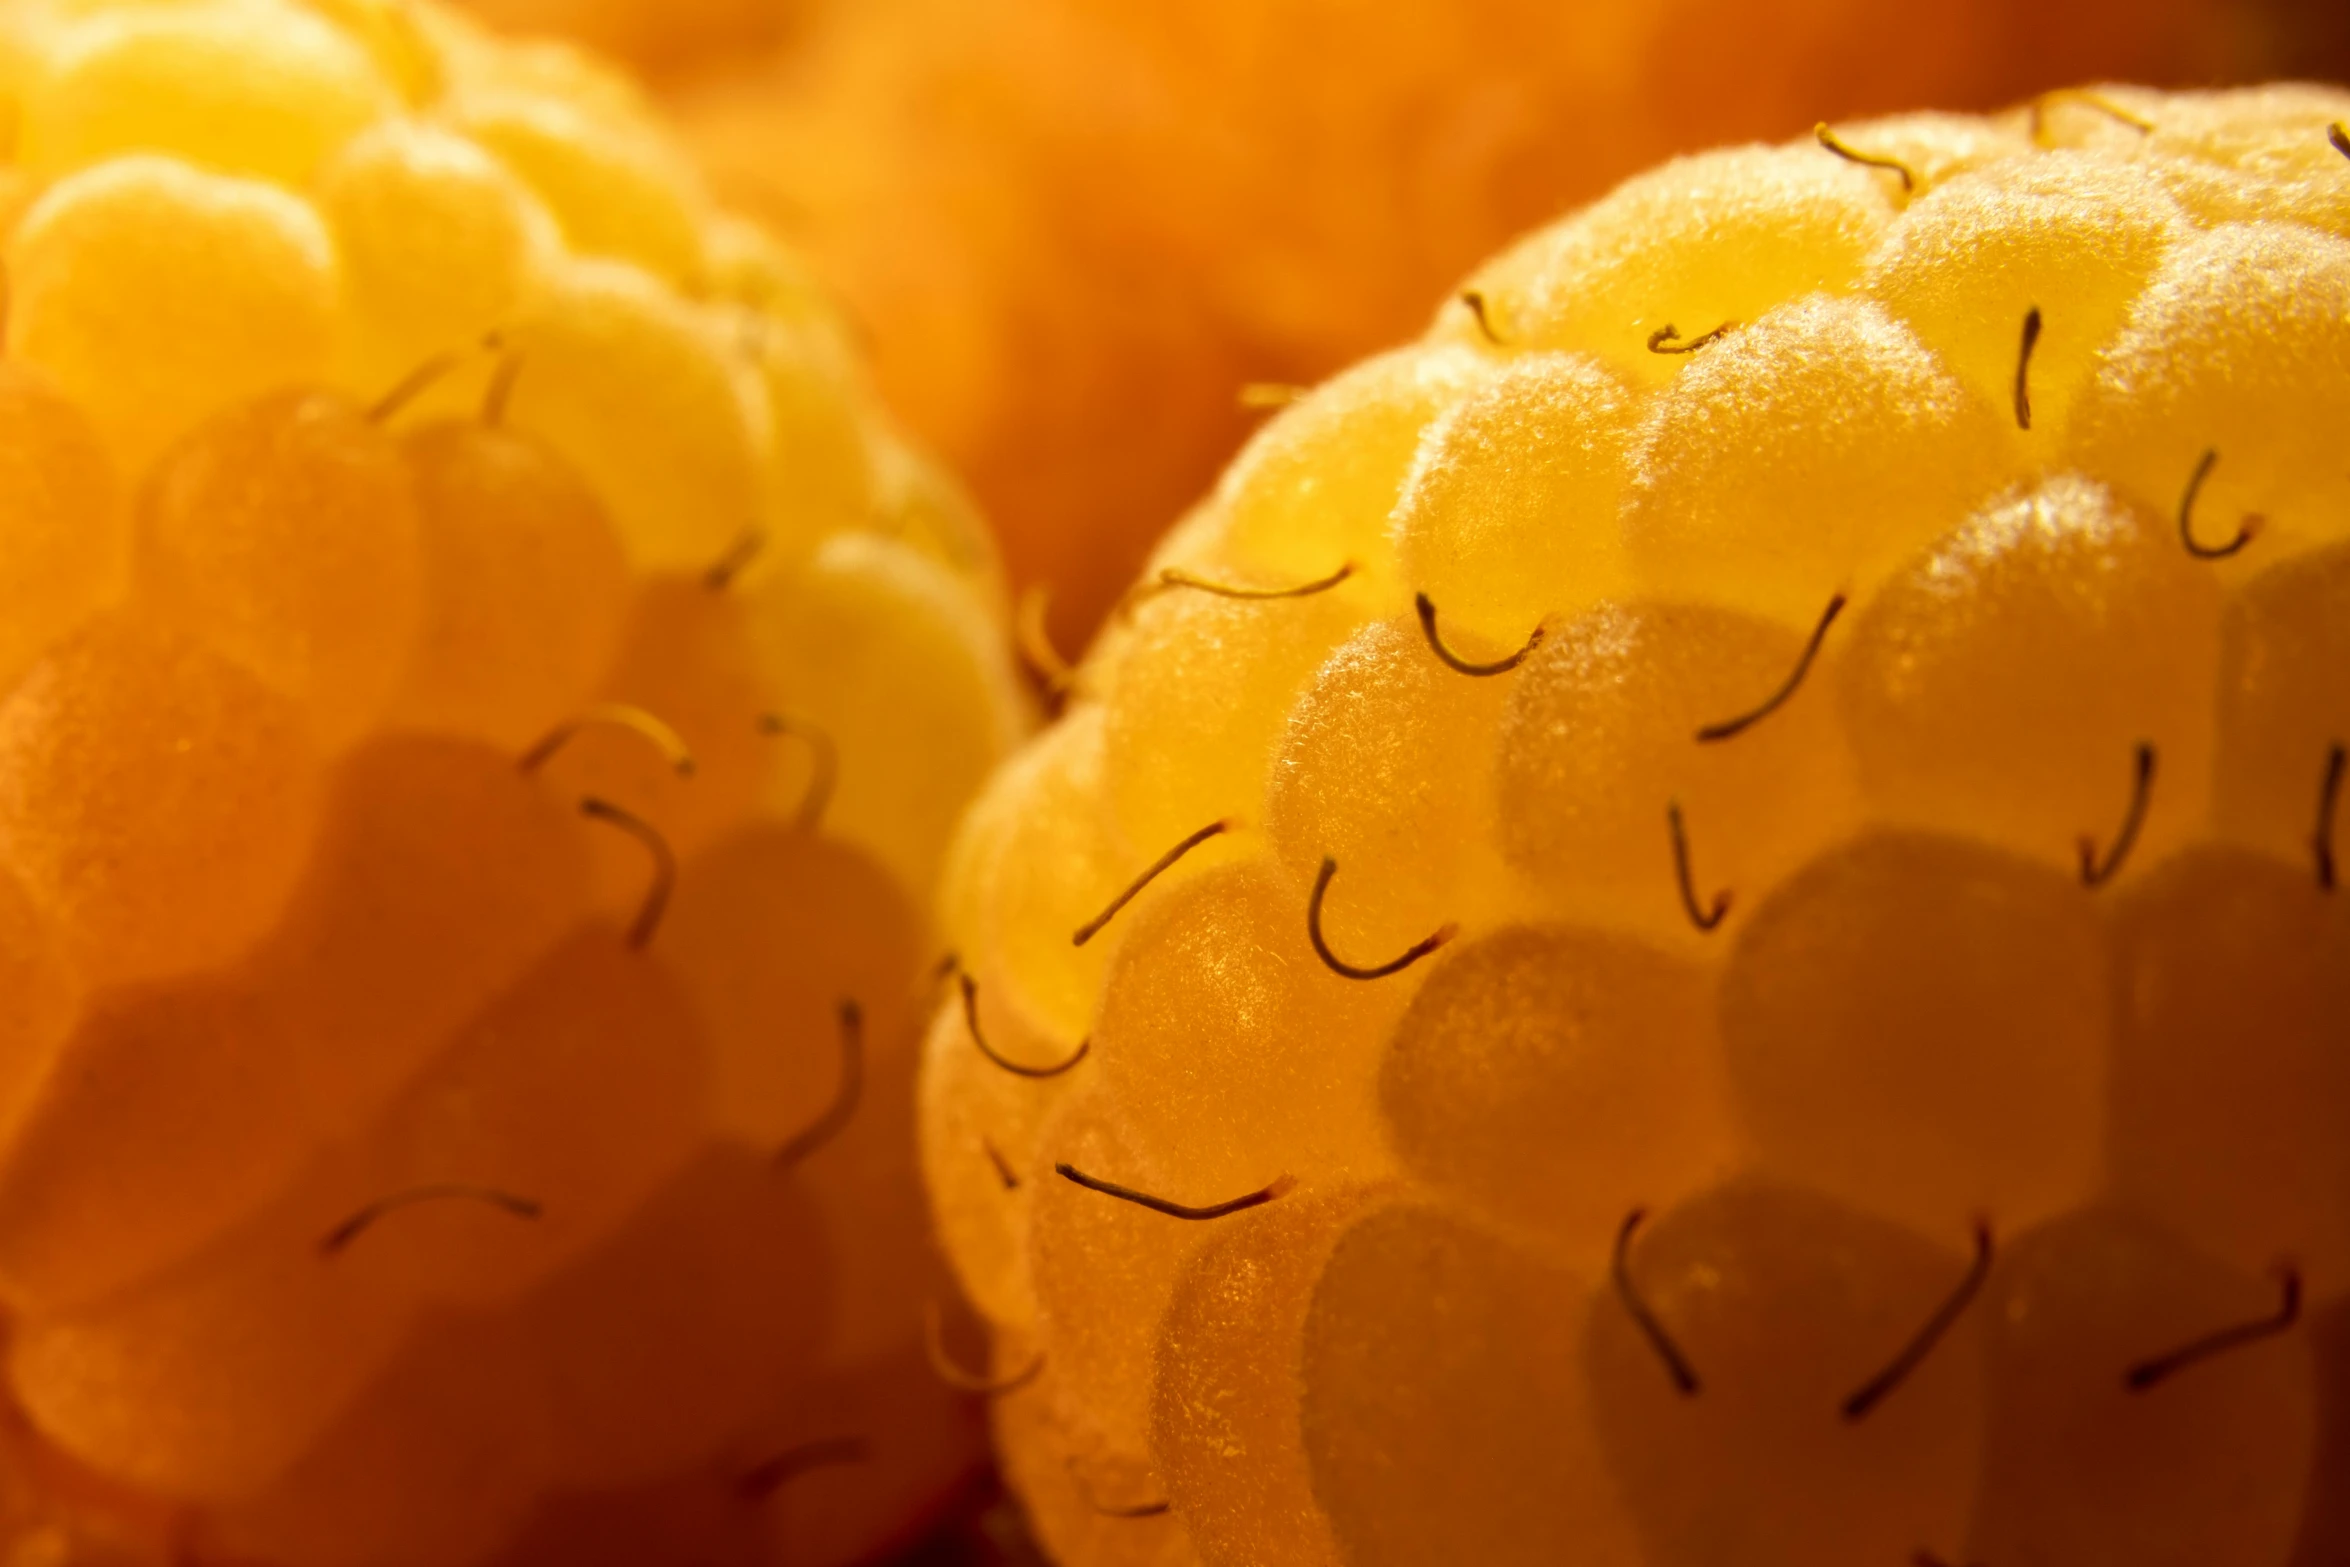 a fruit with lots of yellow stuff and faces drawn on it